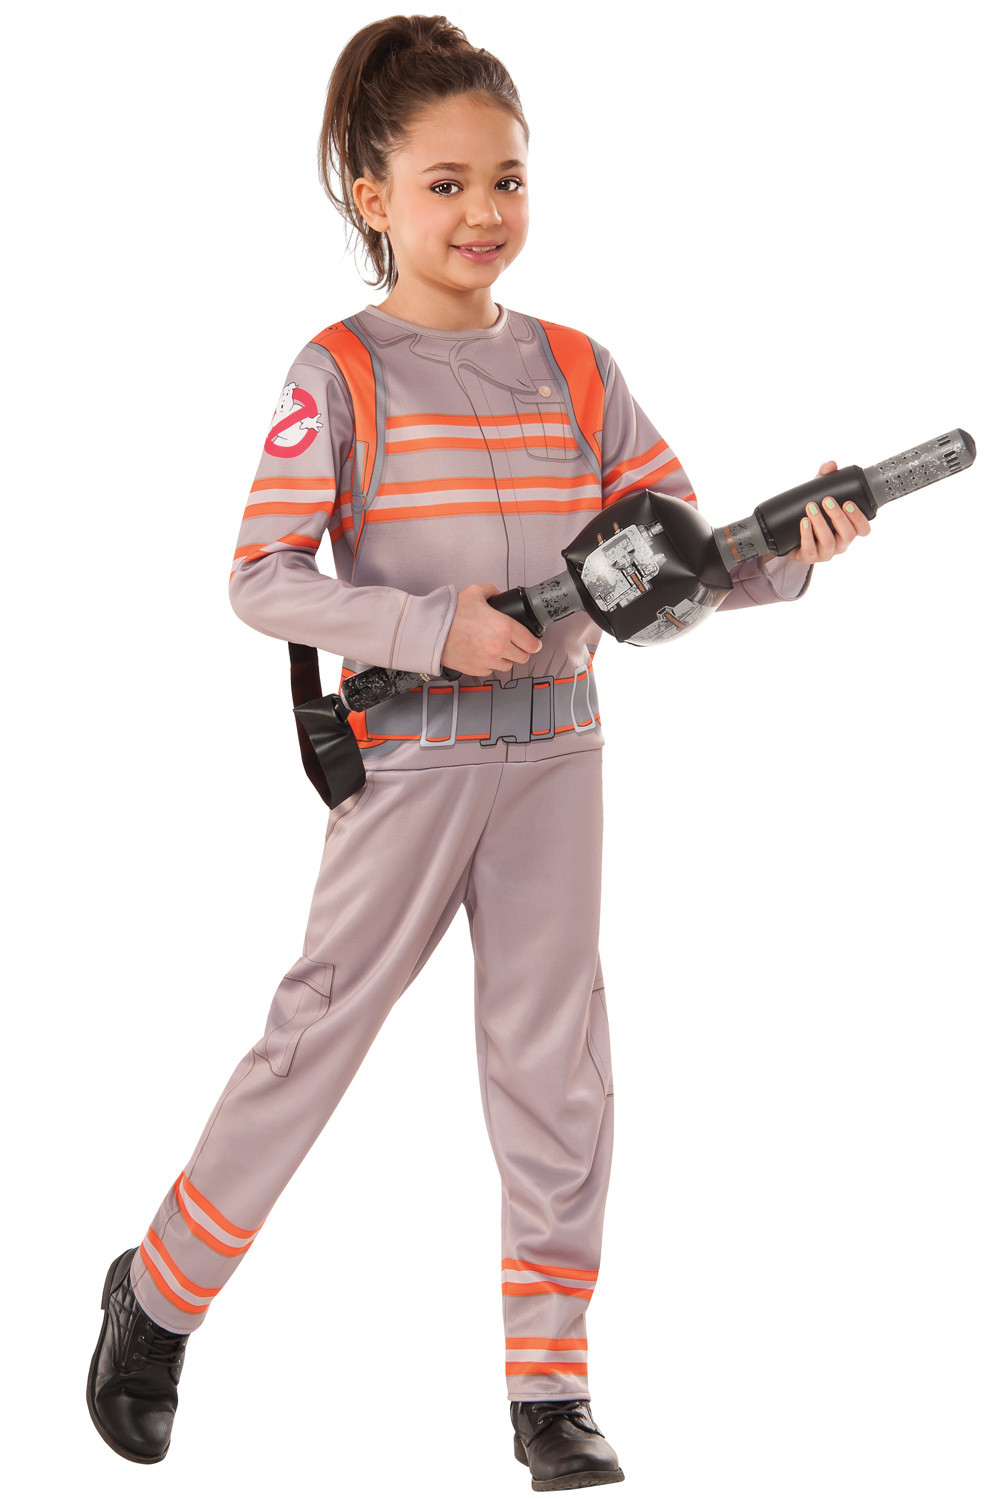 DIY Toddler Ghostbuster Costume
 Ghostbusters Child Costume PureCostumes